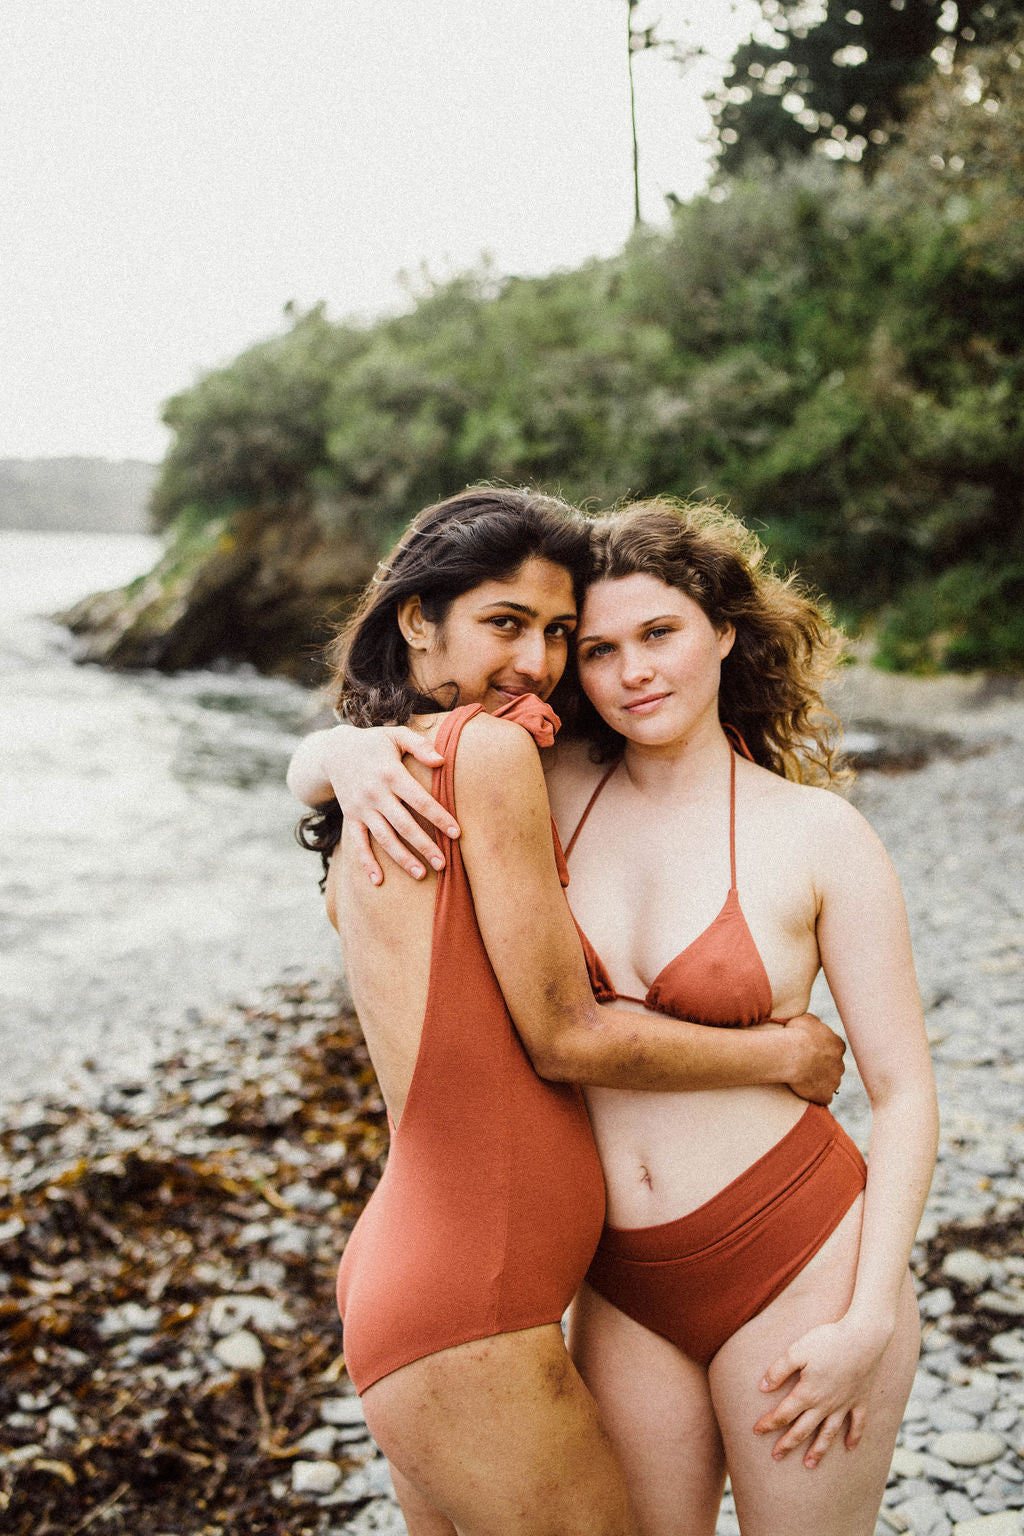 Solpardus models embracing wearing Thea bamboo on Mawnan Smith beach Cornwall. Thea bamboo onepiece Thea bamboo bikini top Thea bamboo bikini bottoms. All natural ethical sustainable bamboo sunwear swimwear perfect for sensitive skin psoriasis and eczema